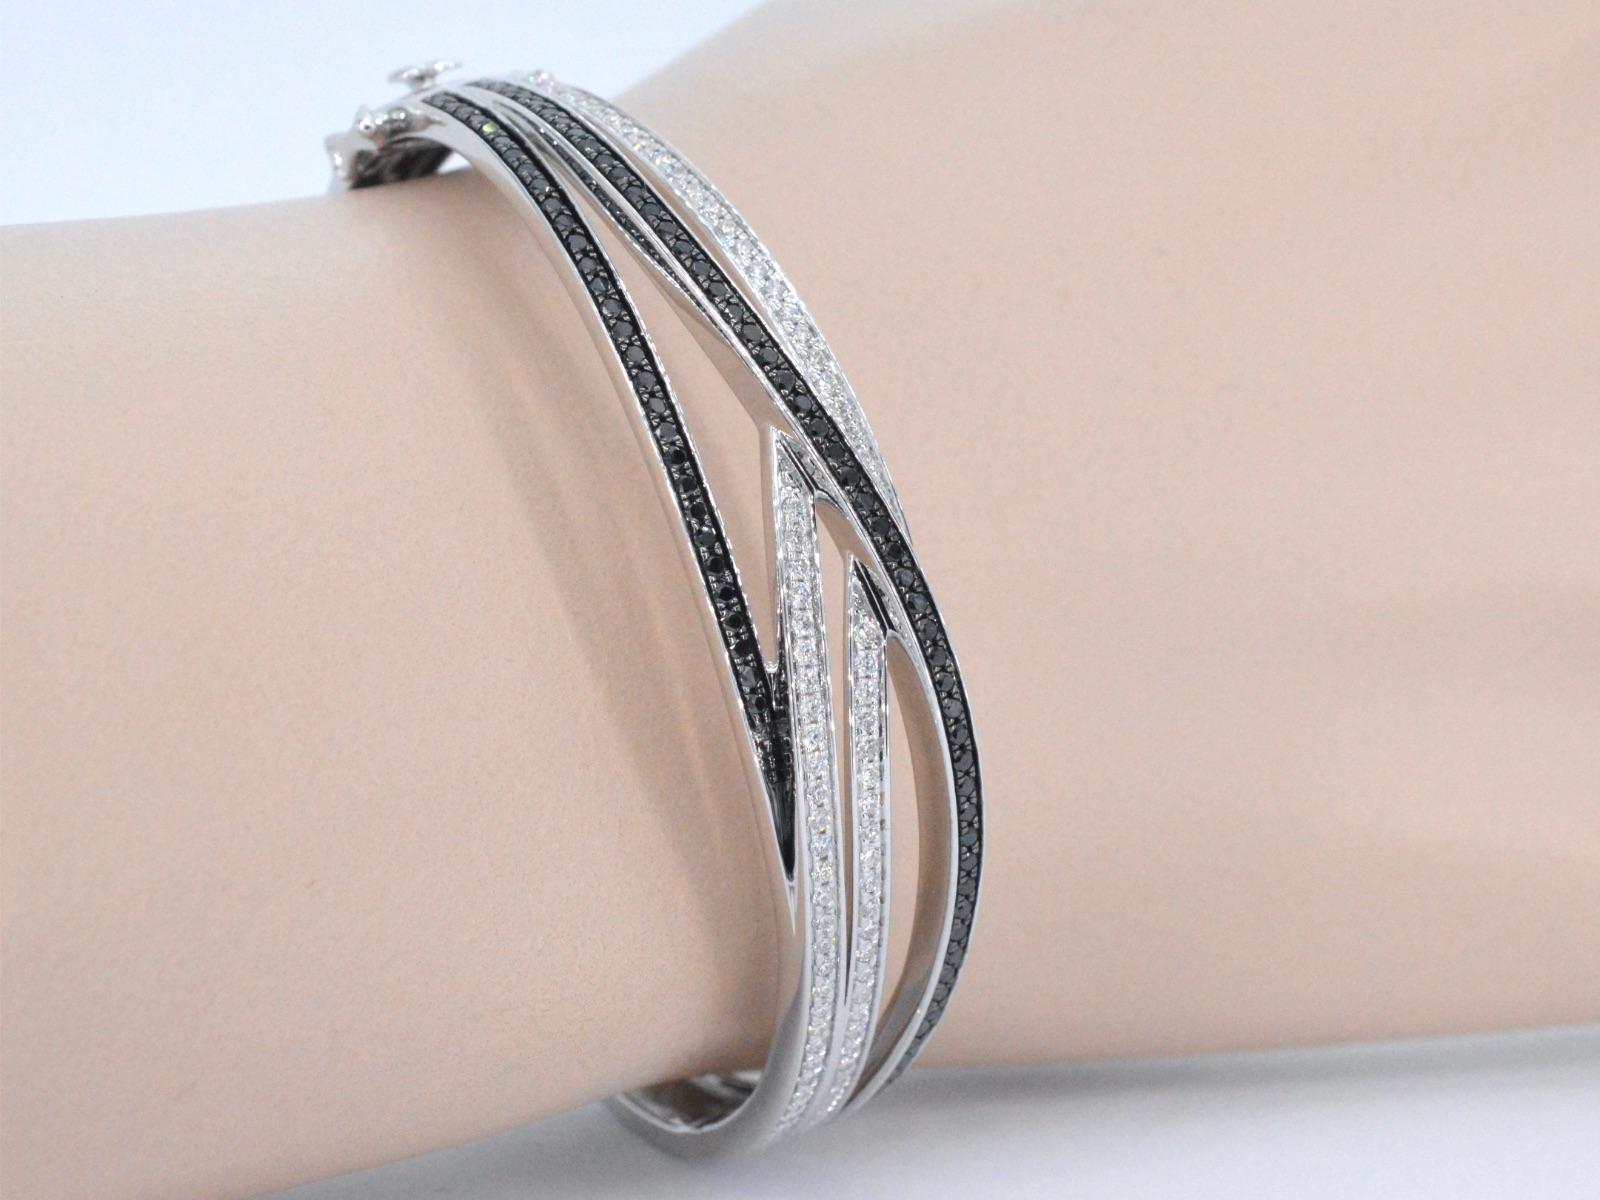 This white gold bracelet is a unique and stylish piece of jewelry that features a stunning design with white and black brilliant diamonds. The diamonds are expertly arranged in a pattern that creates a beautiful contrast between the white and black